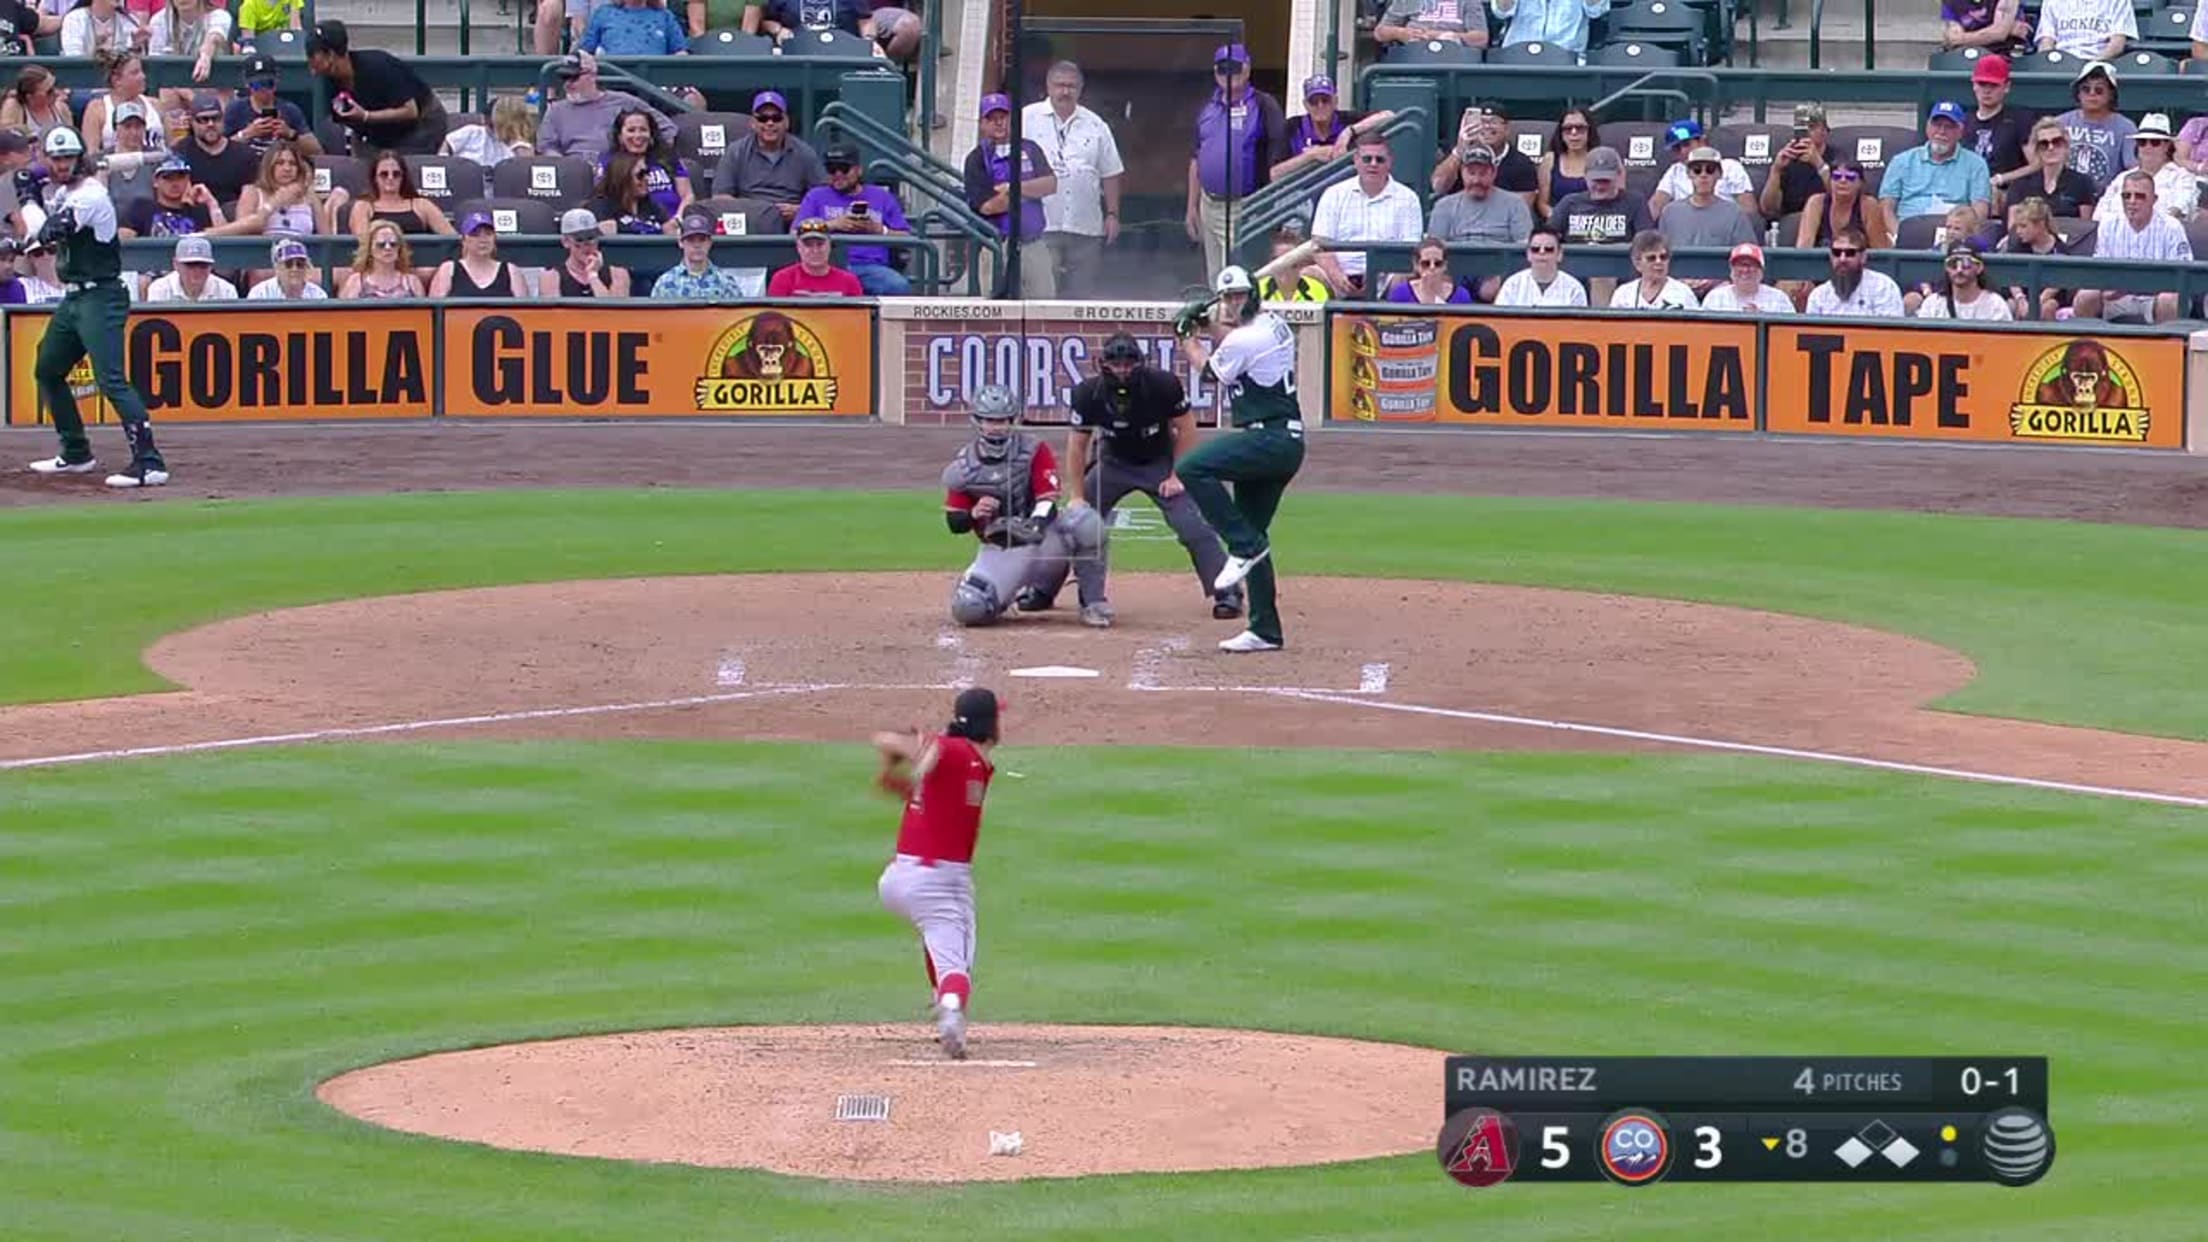 Cleveland Star CHECKED FOR CHEATING!? CJ Cron Hit 504FT Home Run